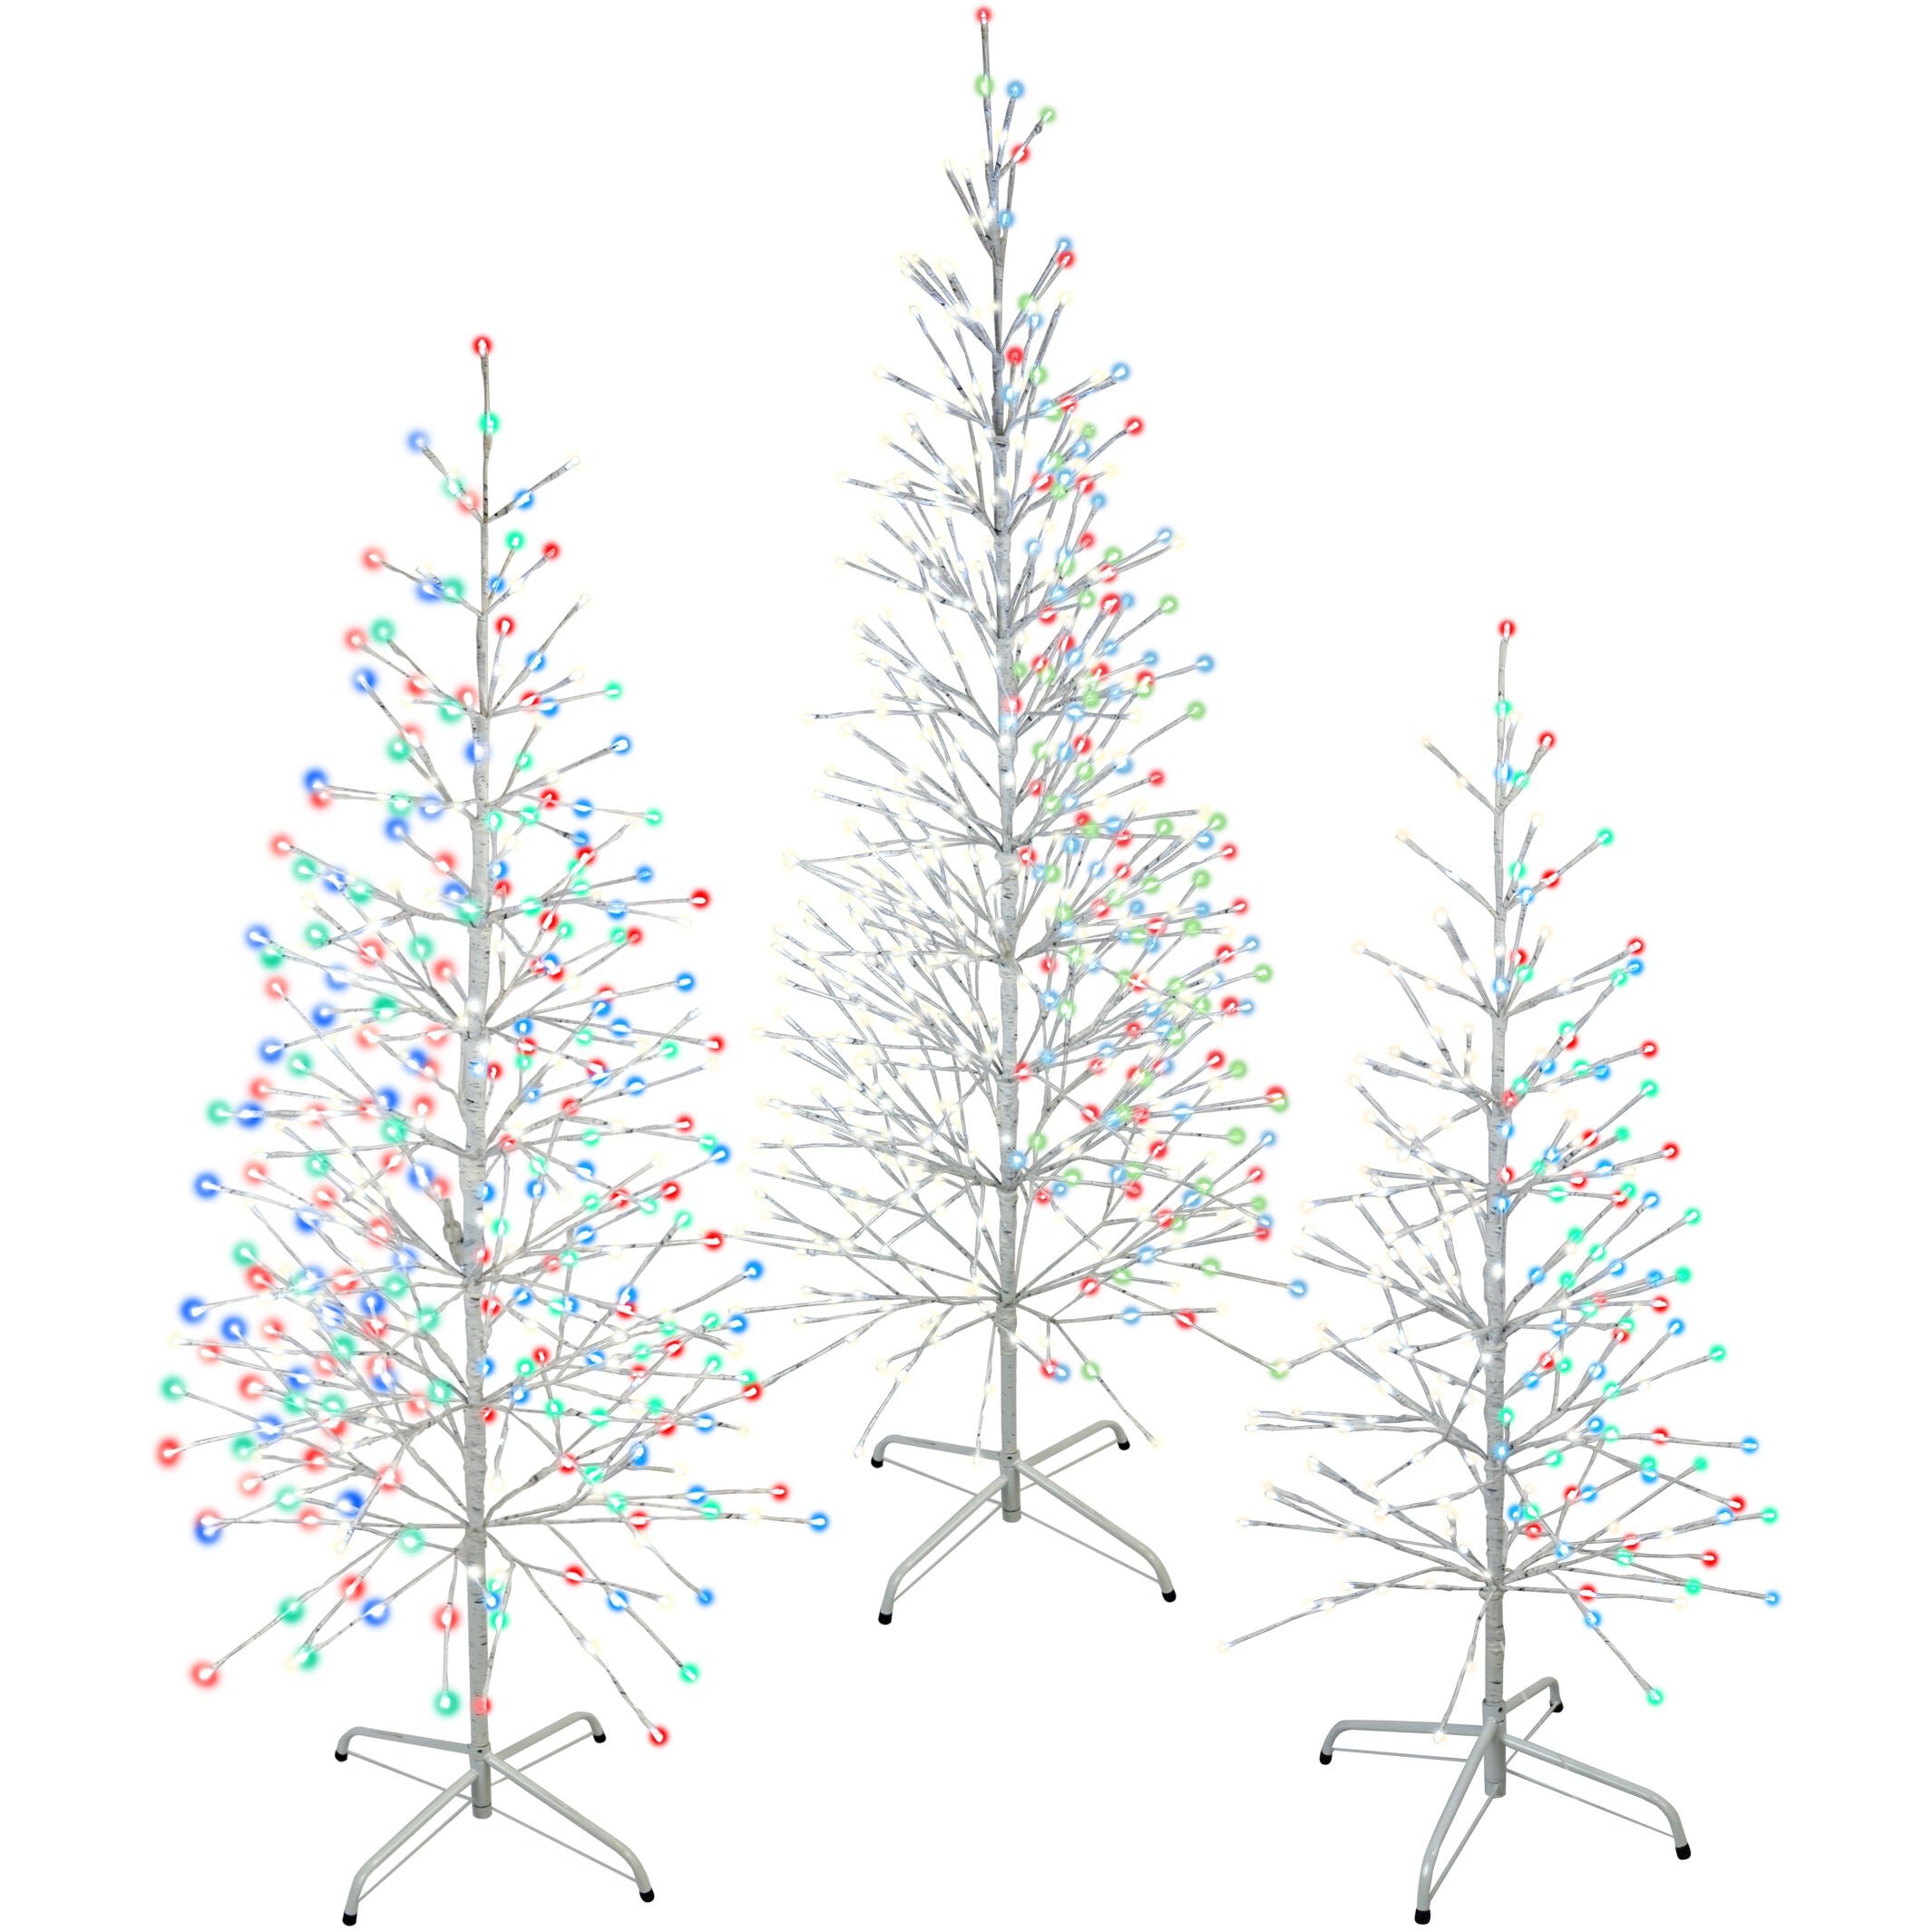 Fraser Hill Farm -  Set of 3 Color Changing Birch Trees, 4-Ft., 5.5-Ft., 6.5-Ft., in Warm White and Multi-Color LED Lights